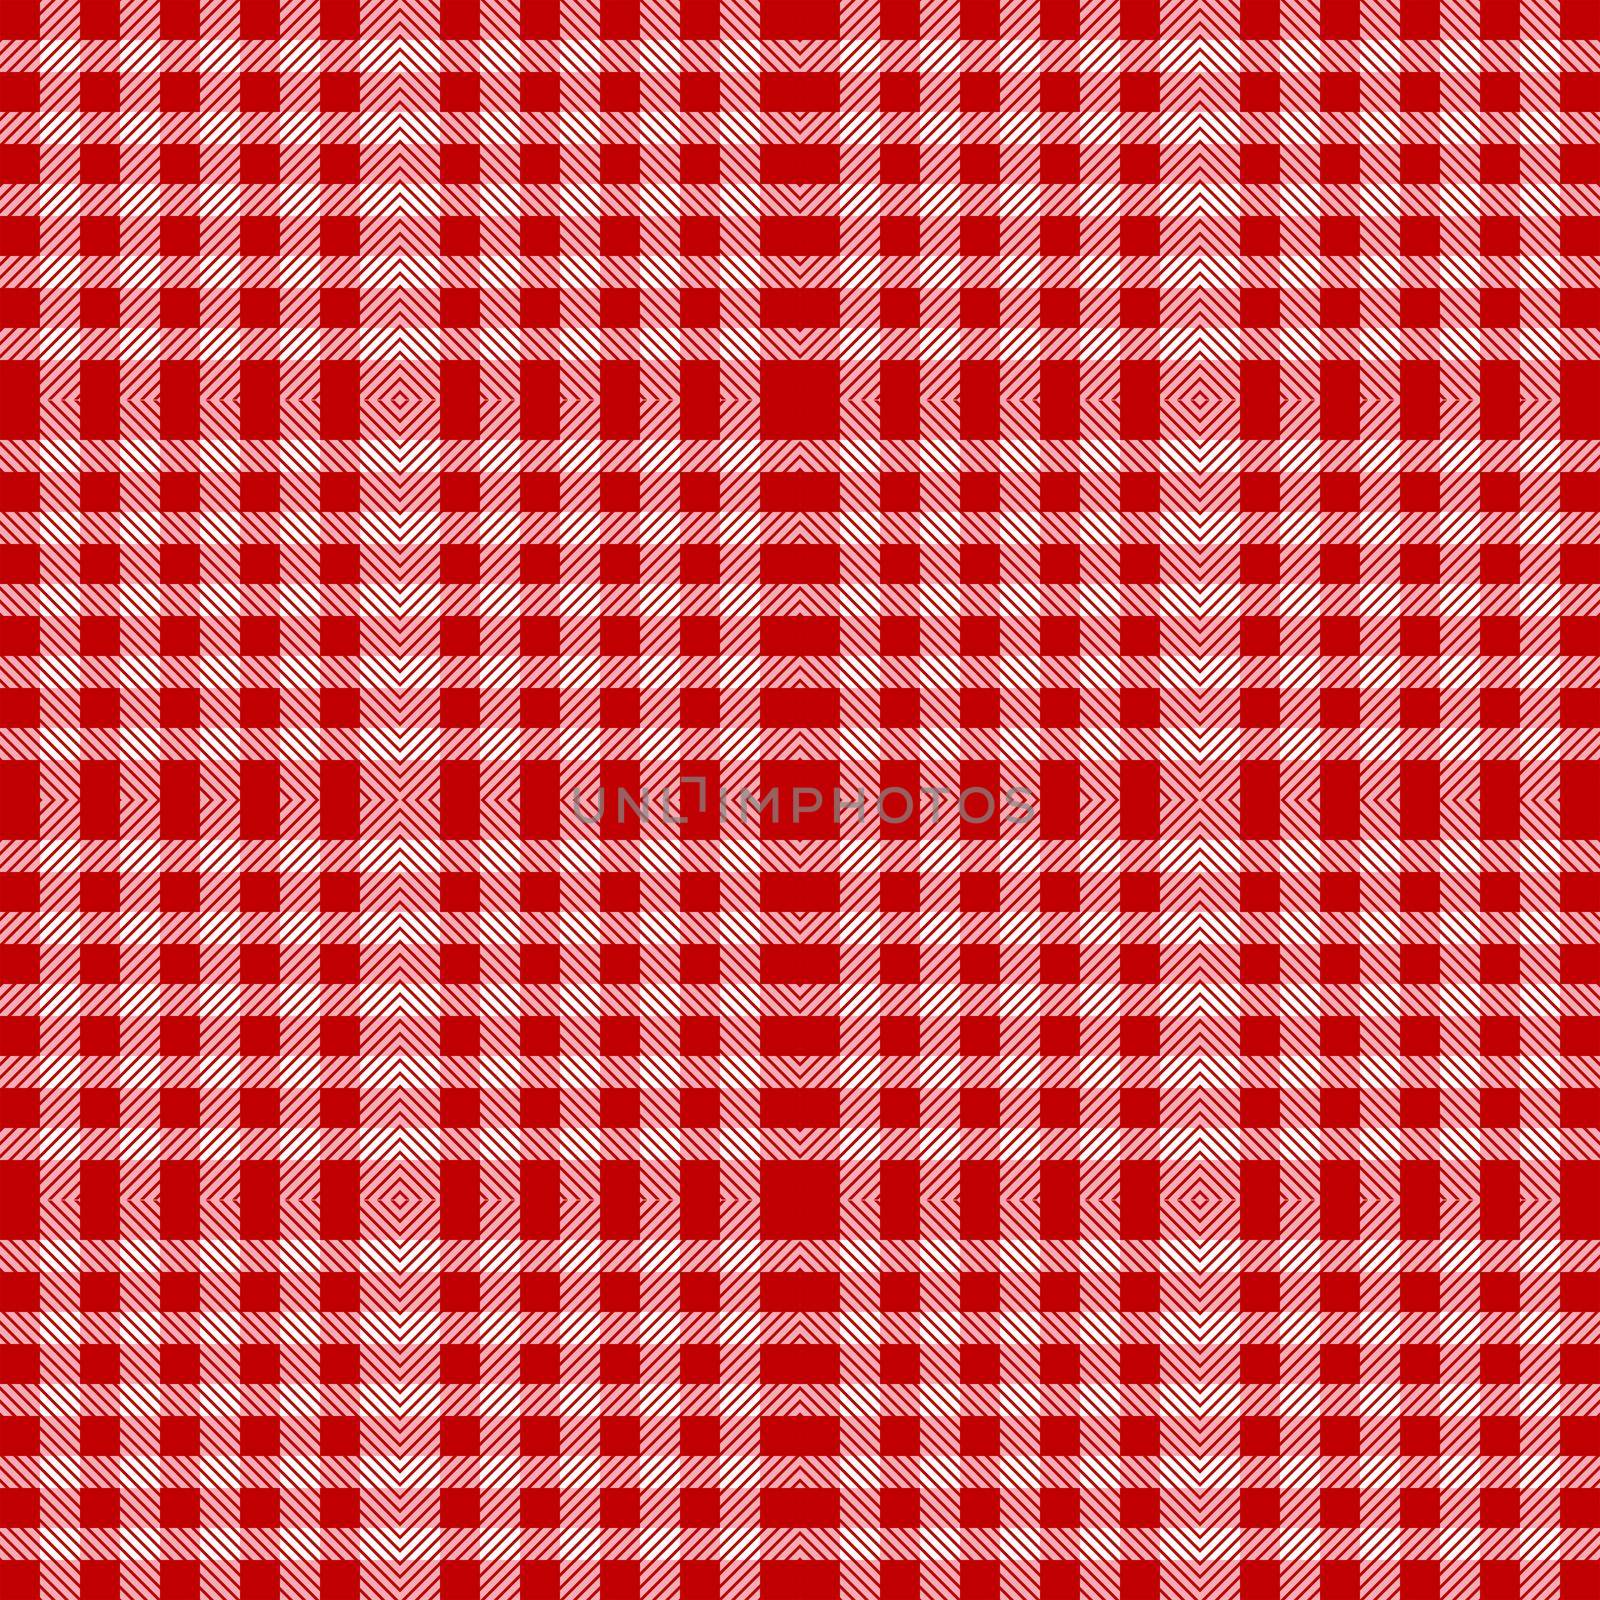 Red tablecloth texture seamless pattern